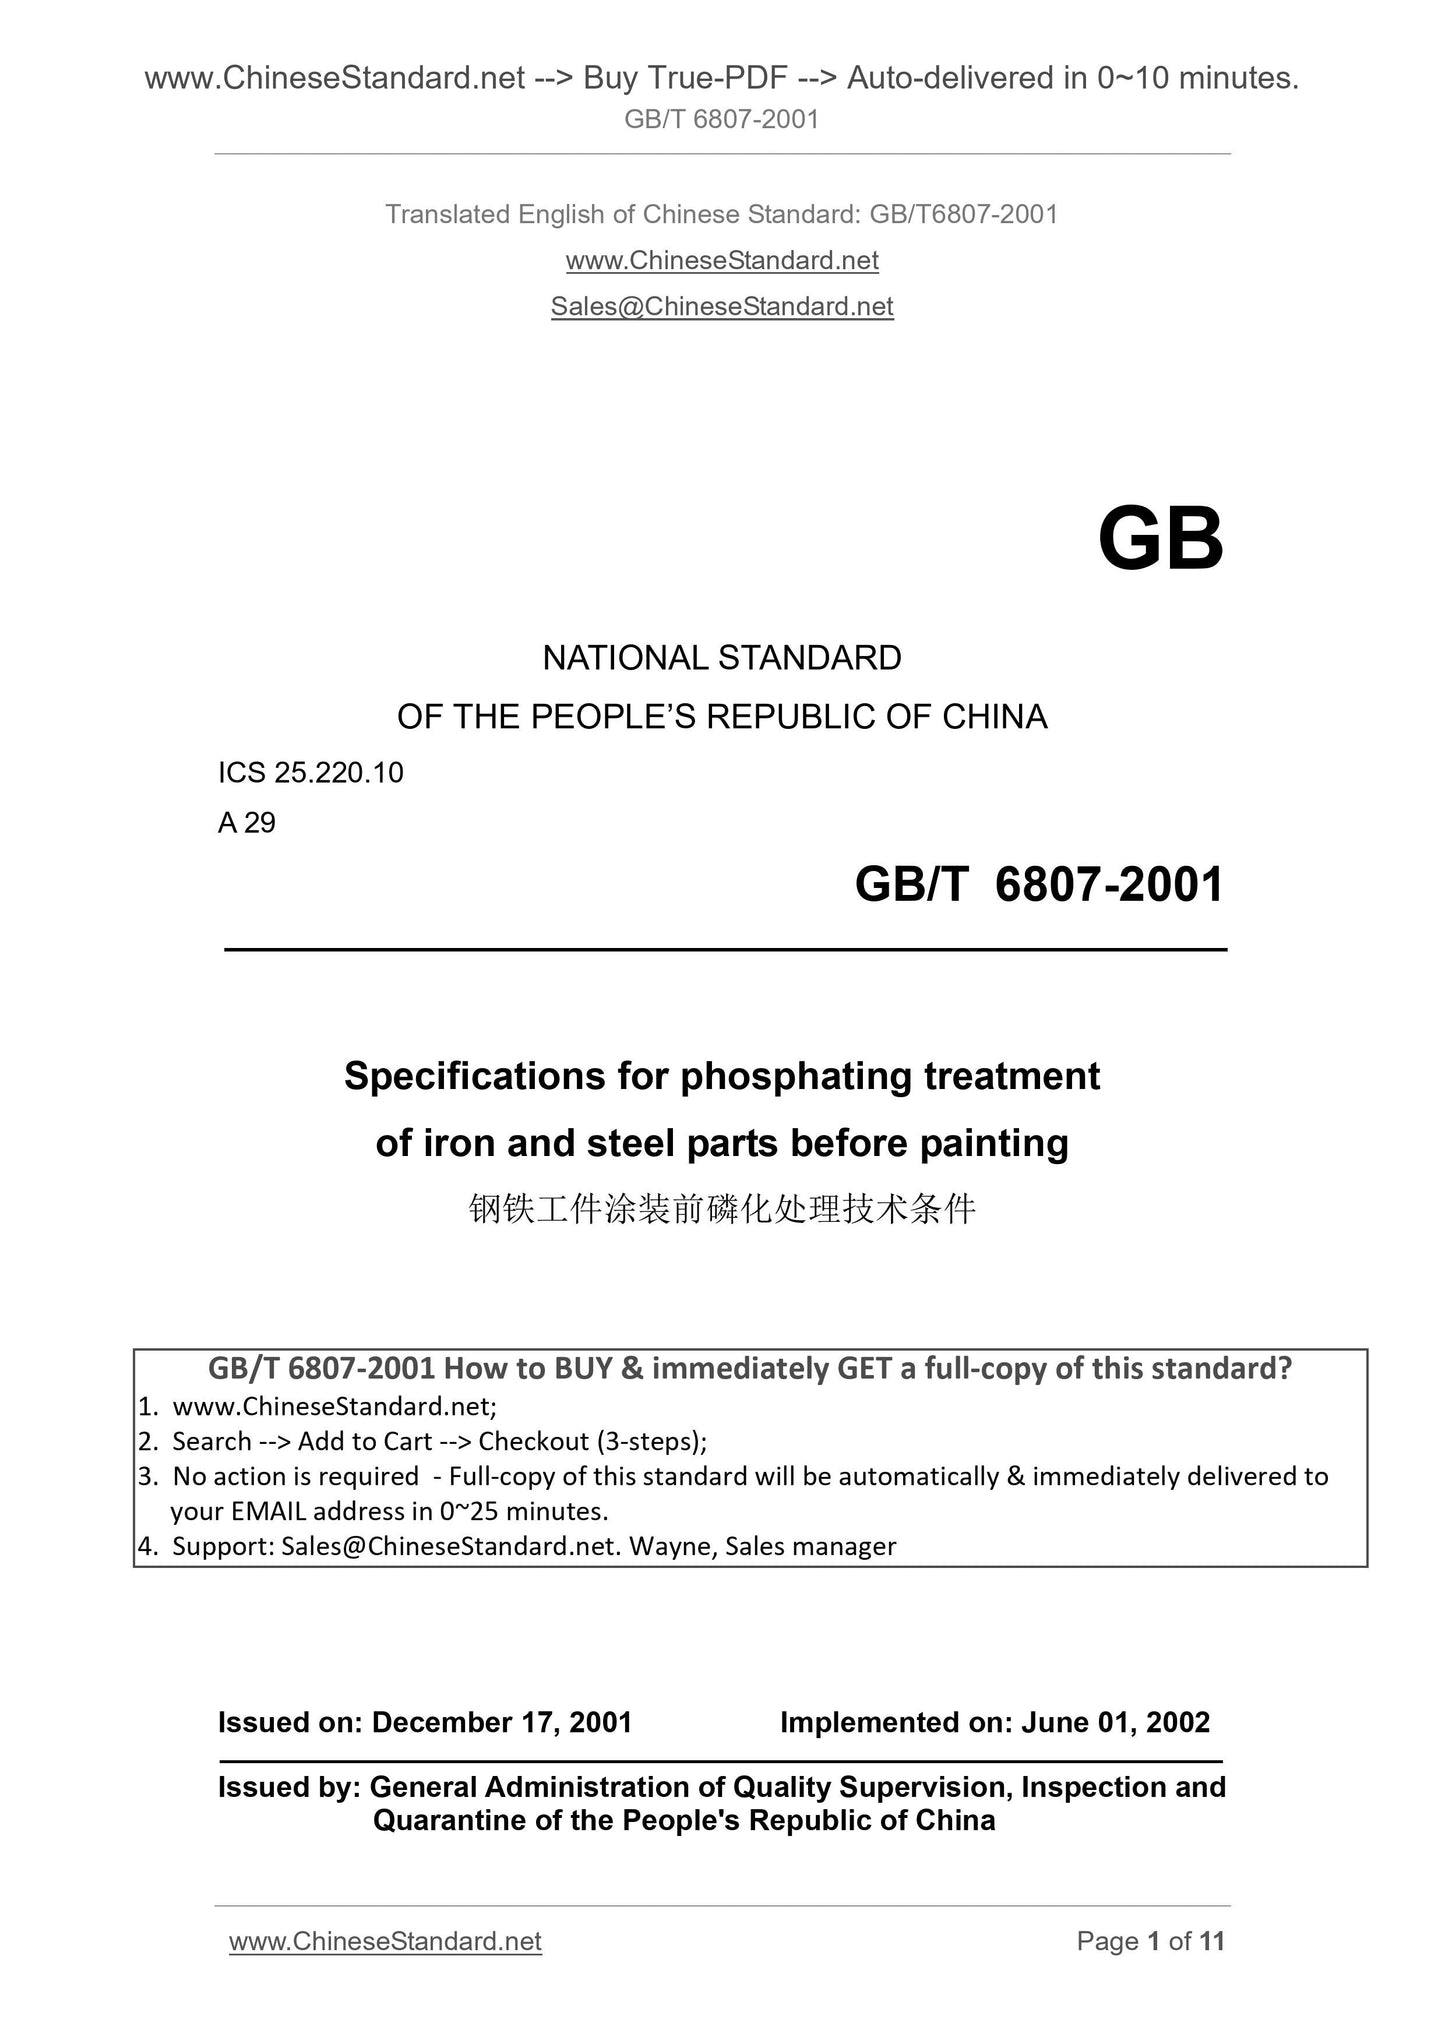 GB/T 6807-2001 Page 1